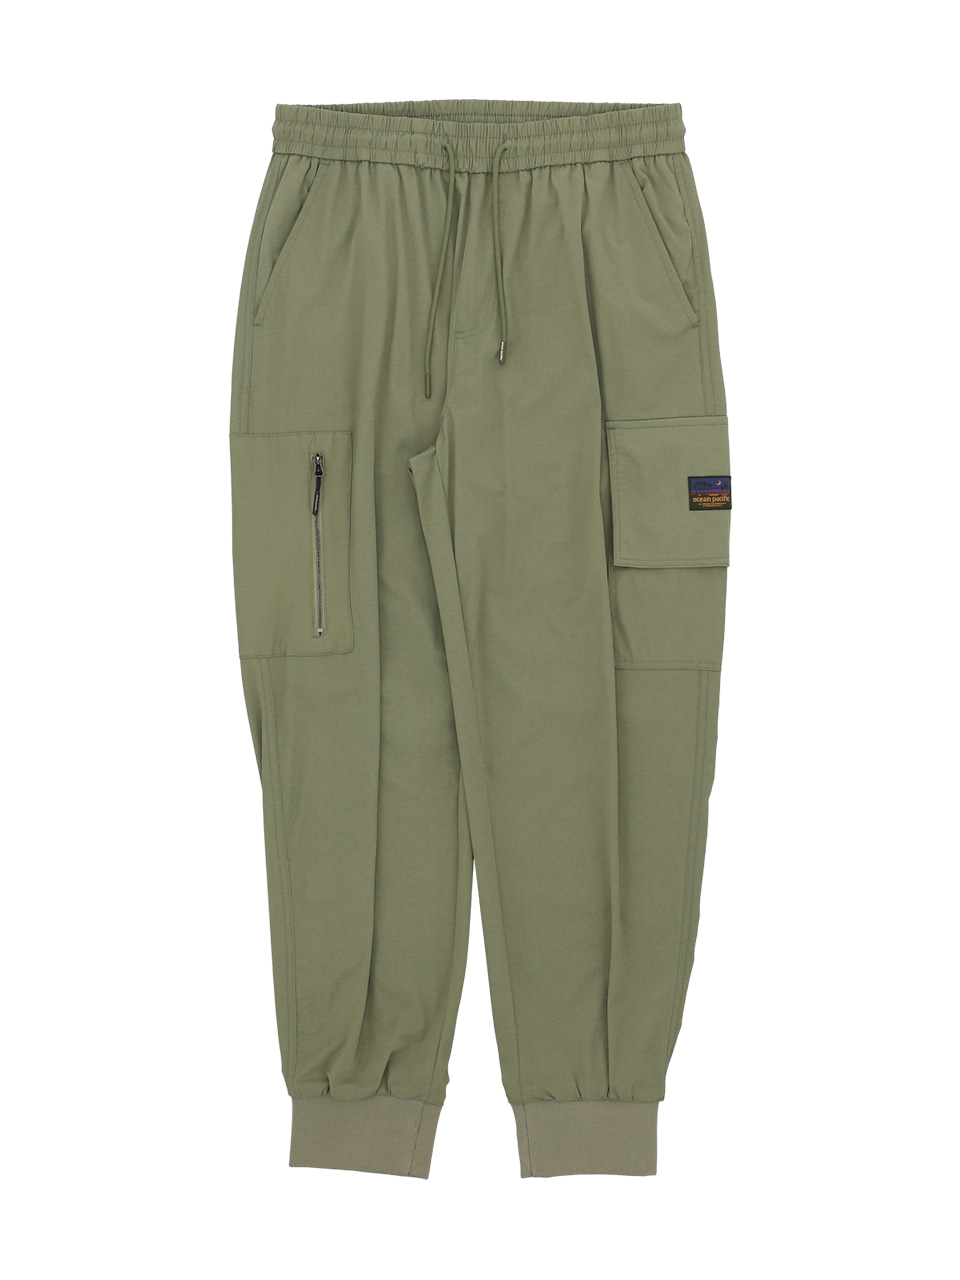 LAND COOLING SPAN CARGO PANTS [2 COLOR]